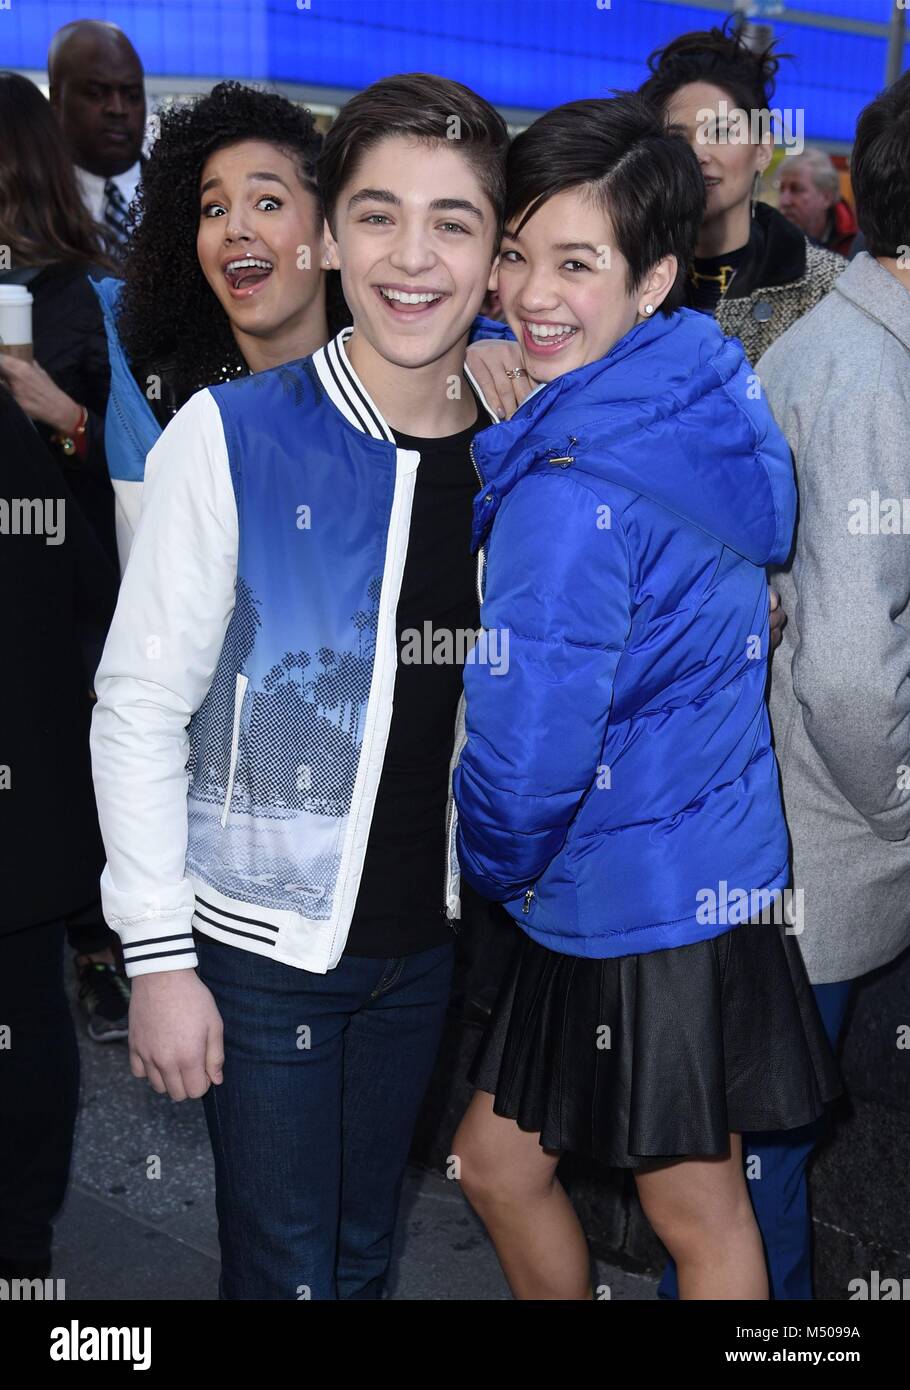 New York, NY, USA. 19th Feb, 2018. Asher Angel, Peyton Elizabeth Lee, seen at Good Morning America to promote ANDI MACK out and about for ANDI MACK Cast on Good Morning America (GMA), GMA Studios, New York, NY February 19, 2018. Credit: Derek Storm/Everett Collection/Alamy Live News Stock Photo